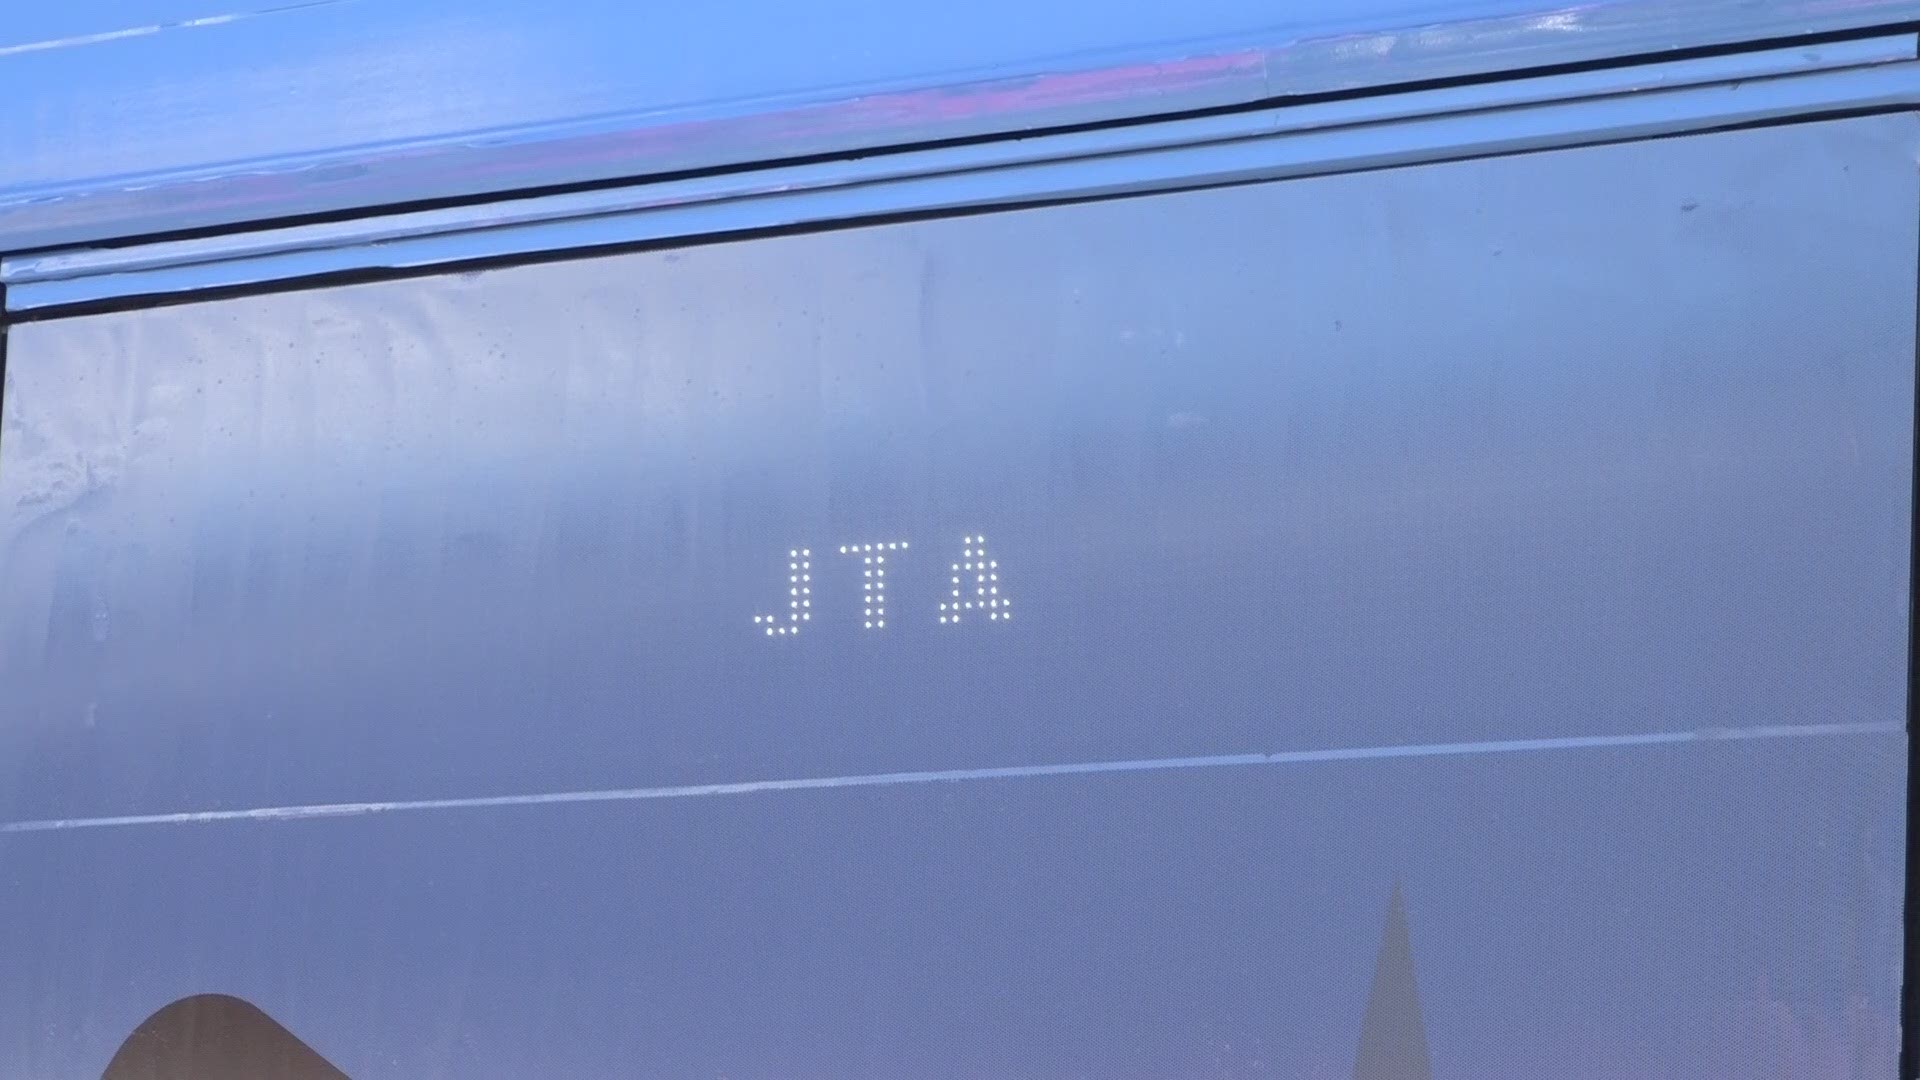 The JTA Holiday Bus is free to ride and will be in operation until Christmas Eve.